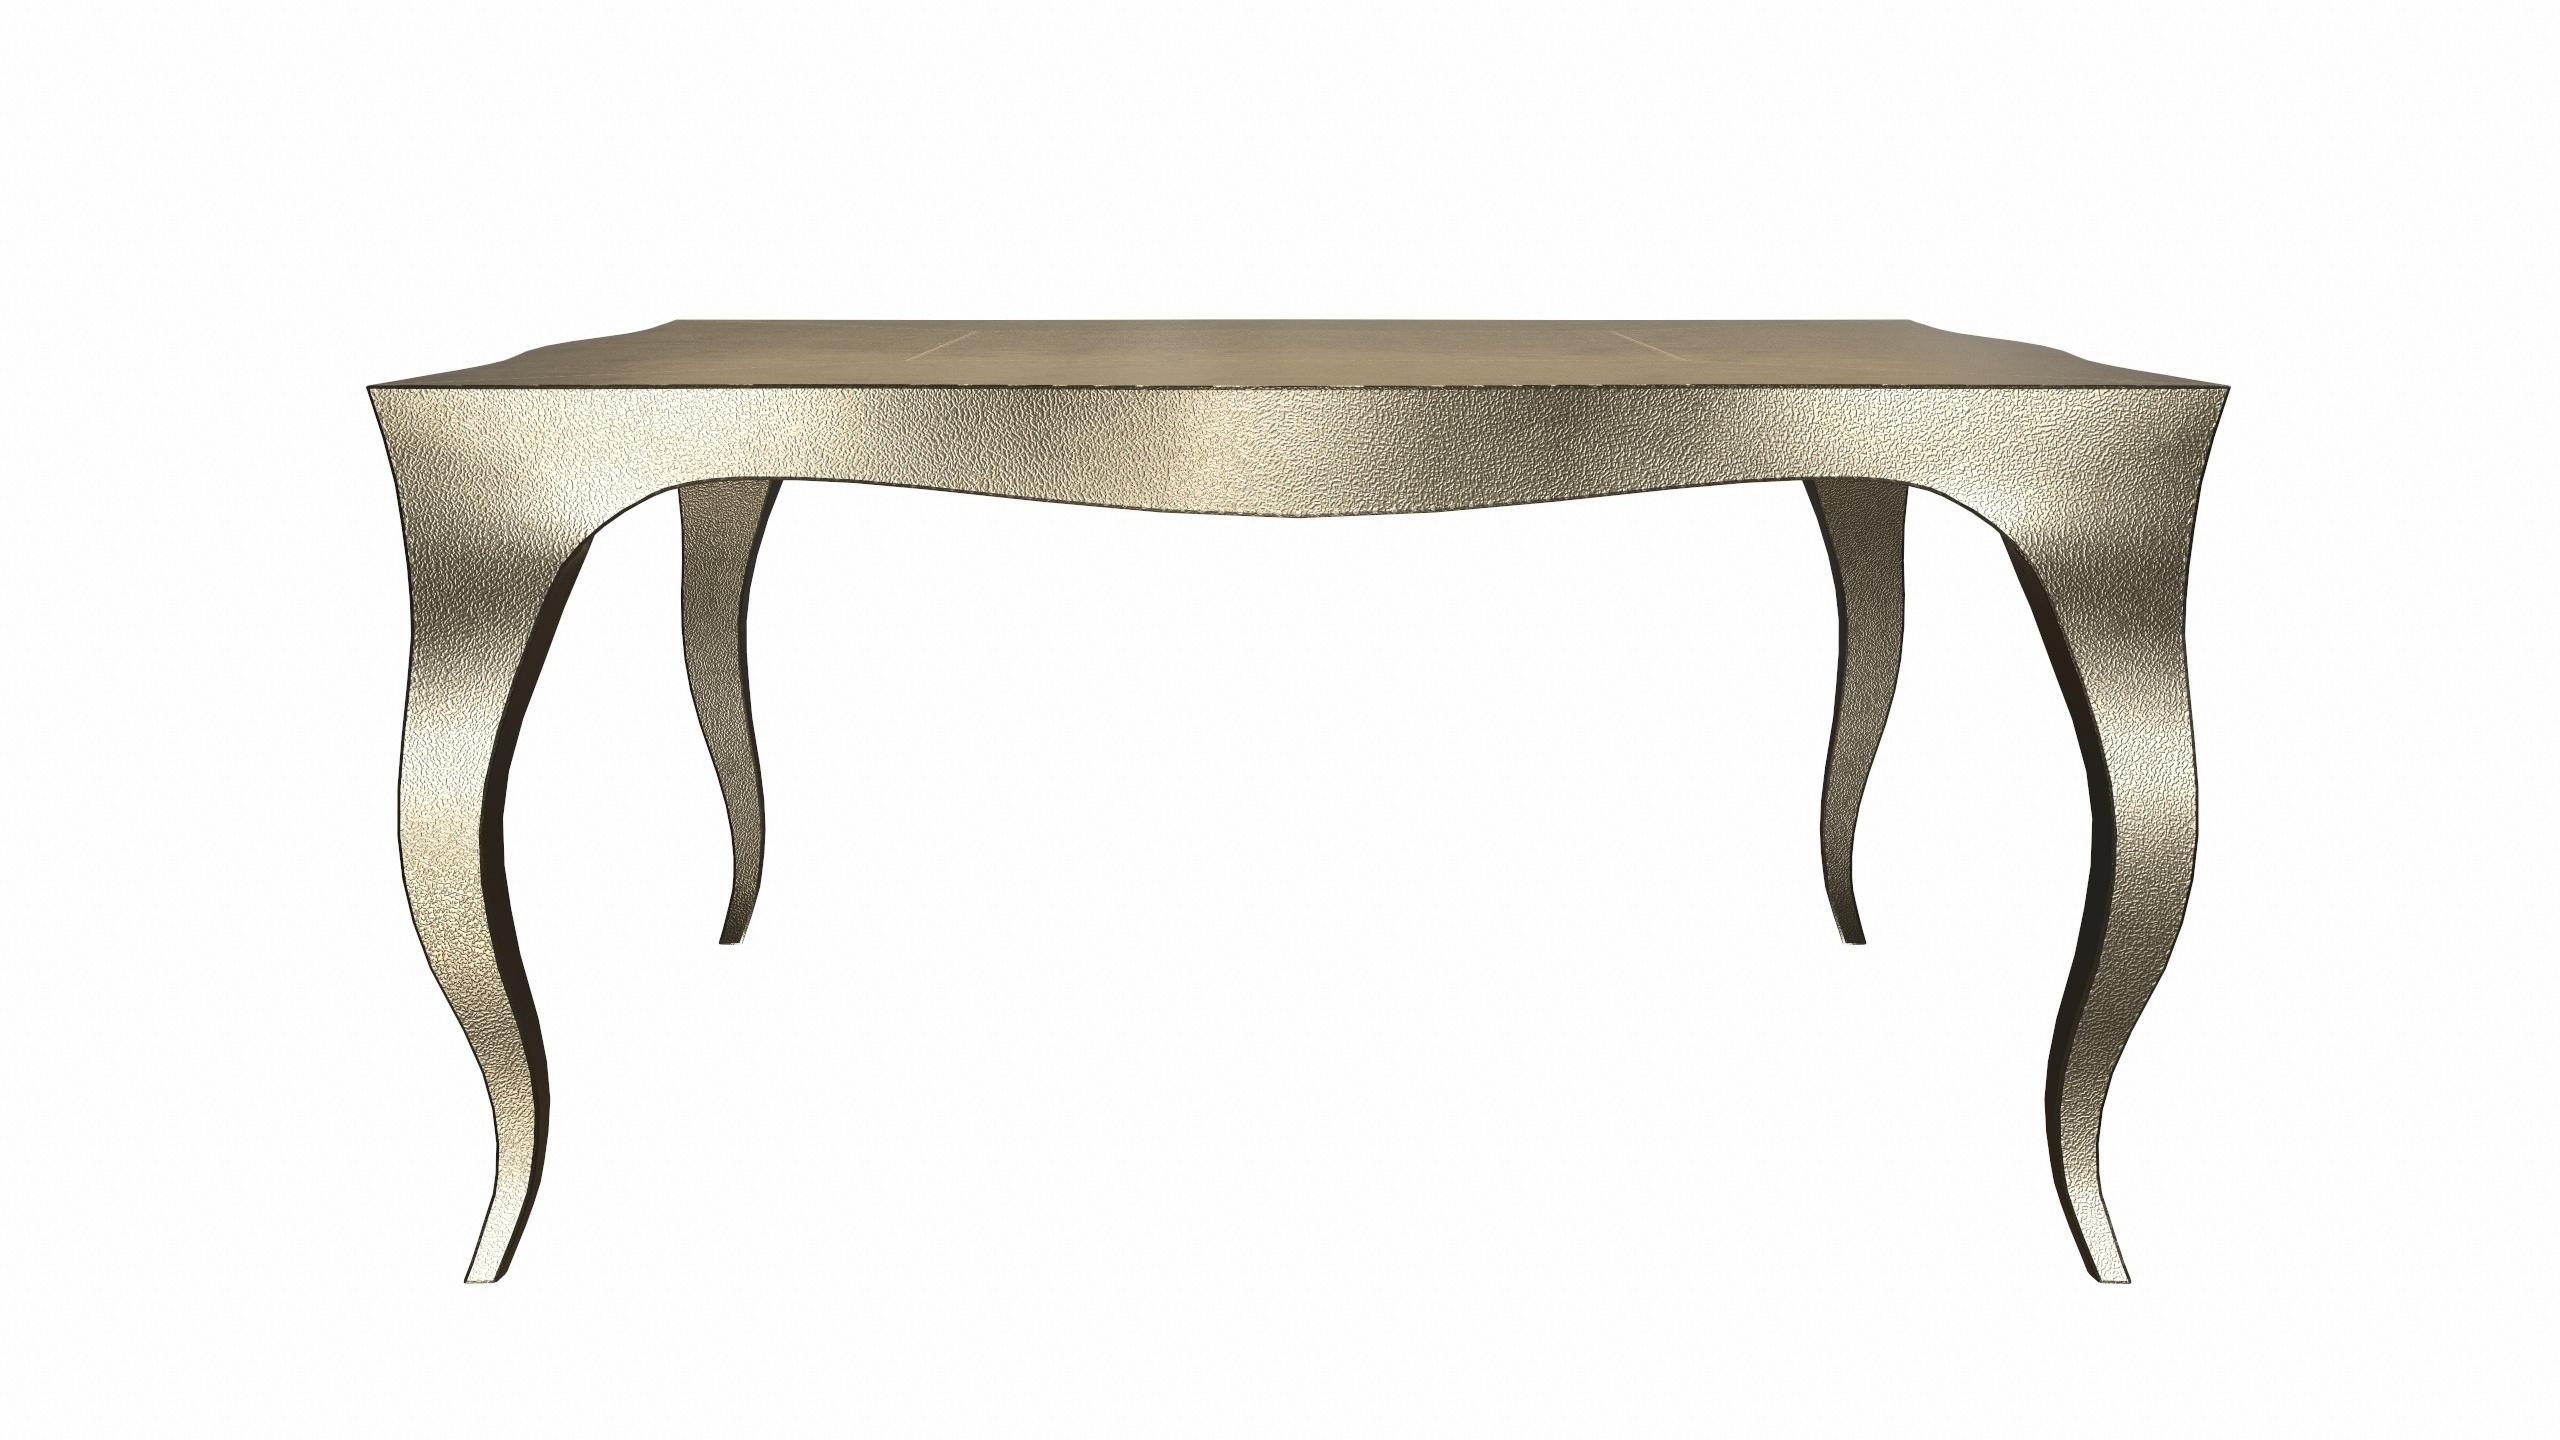 American Louise Art Deco Center Tables Fine Hammered Brass 18.5x18.5x10 inch  For Sale